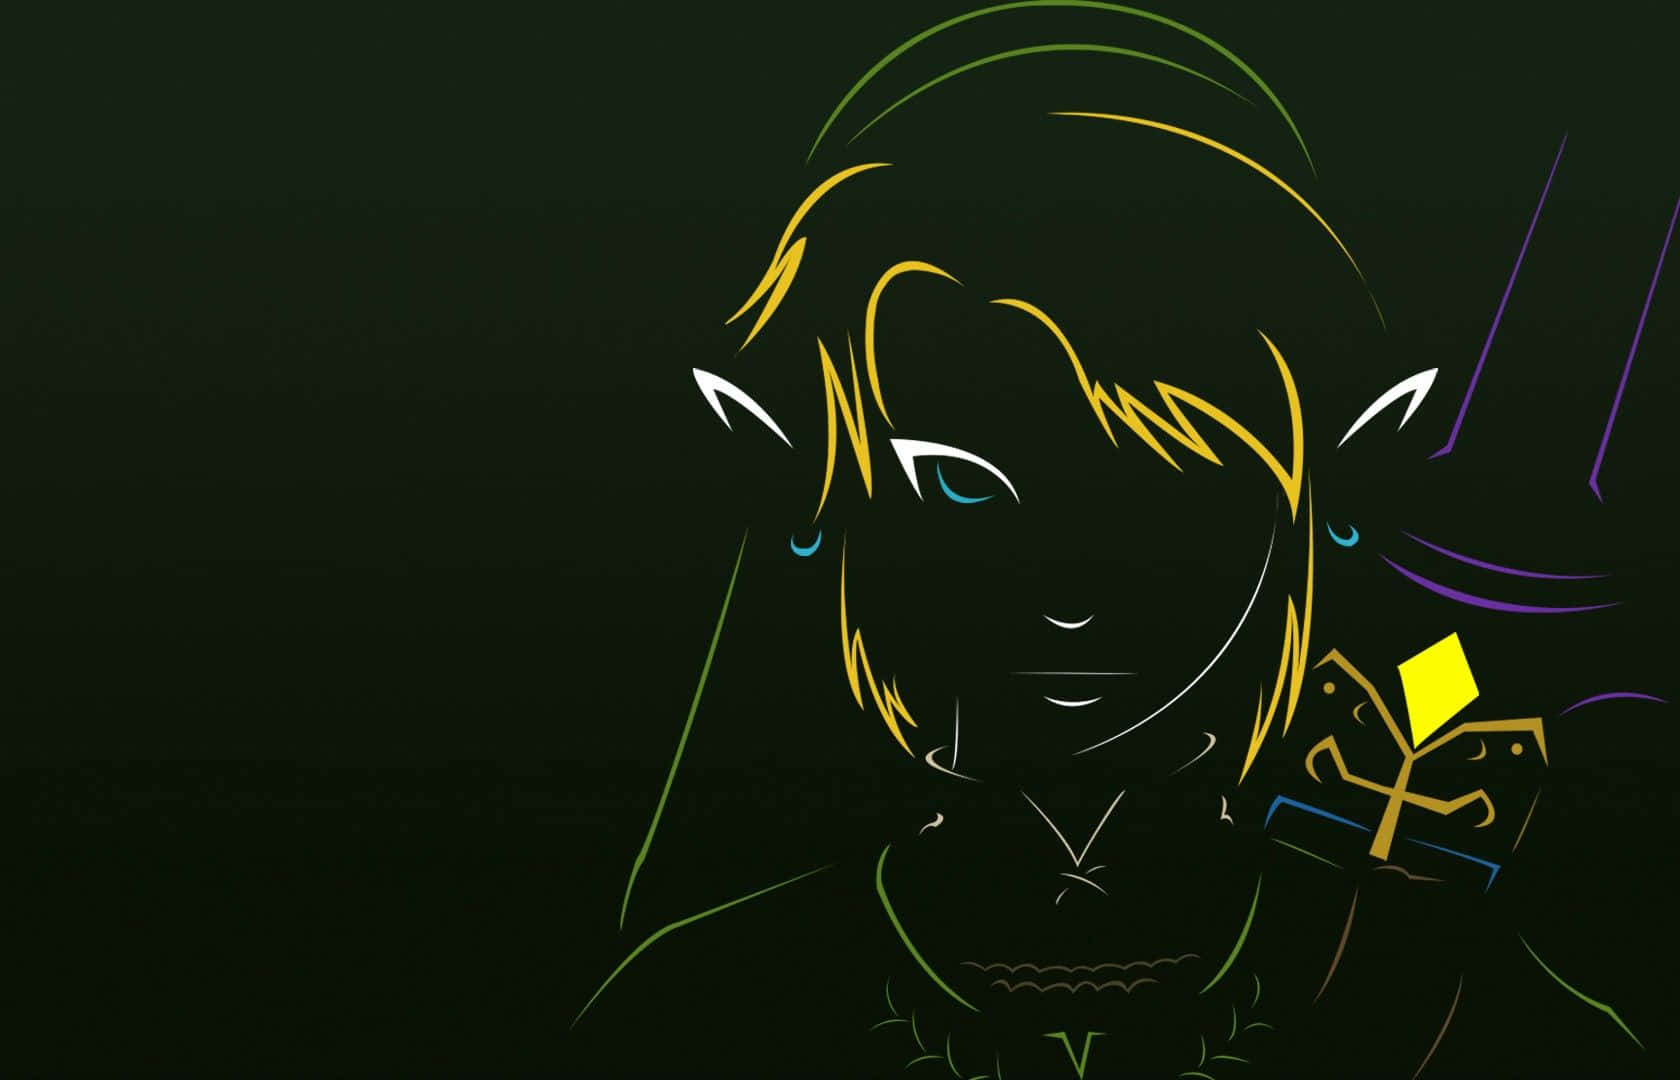 Take On Exciting Adventures Through Hyrule With The Legend Of Zelda.